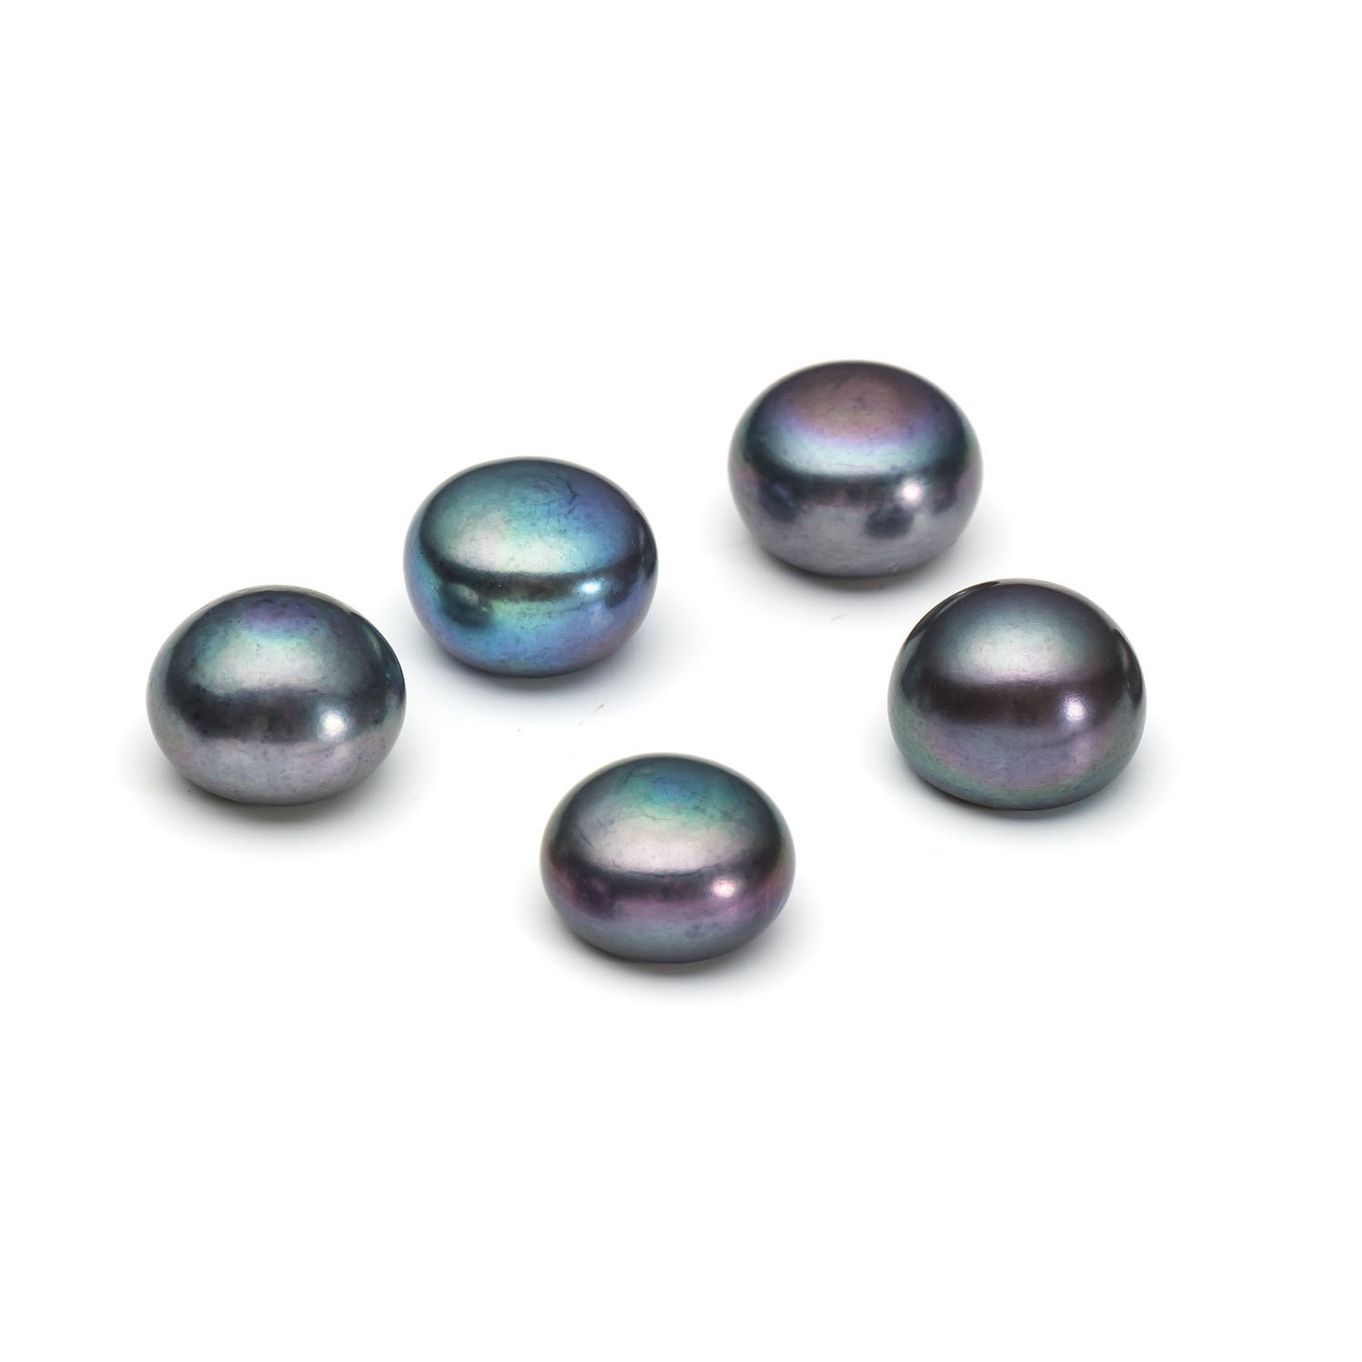 White Cultured Freshwater Pearls Half-Drilled Button 4-4.5mm